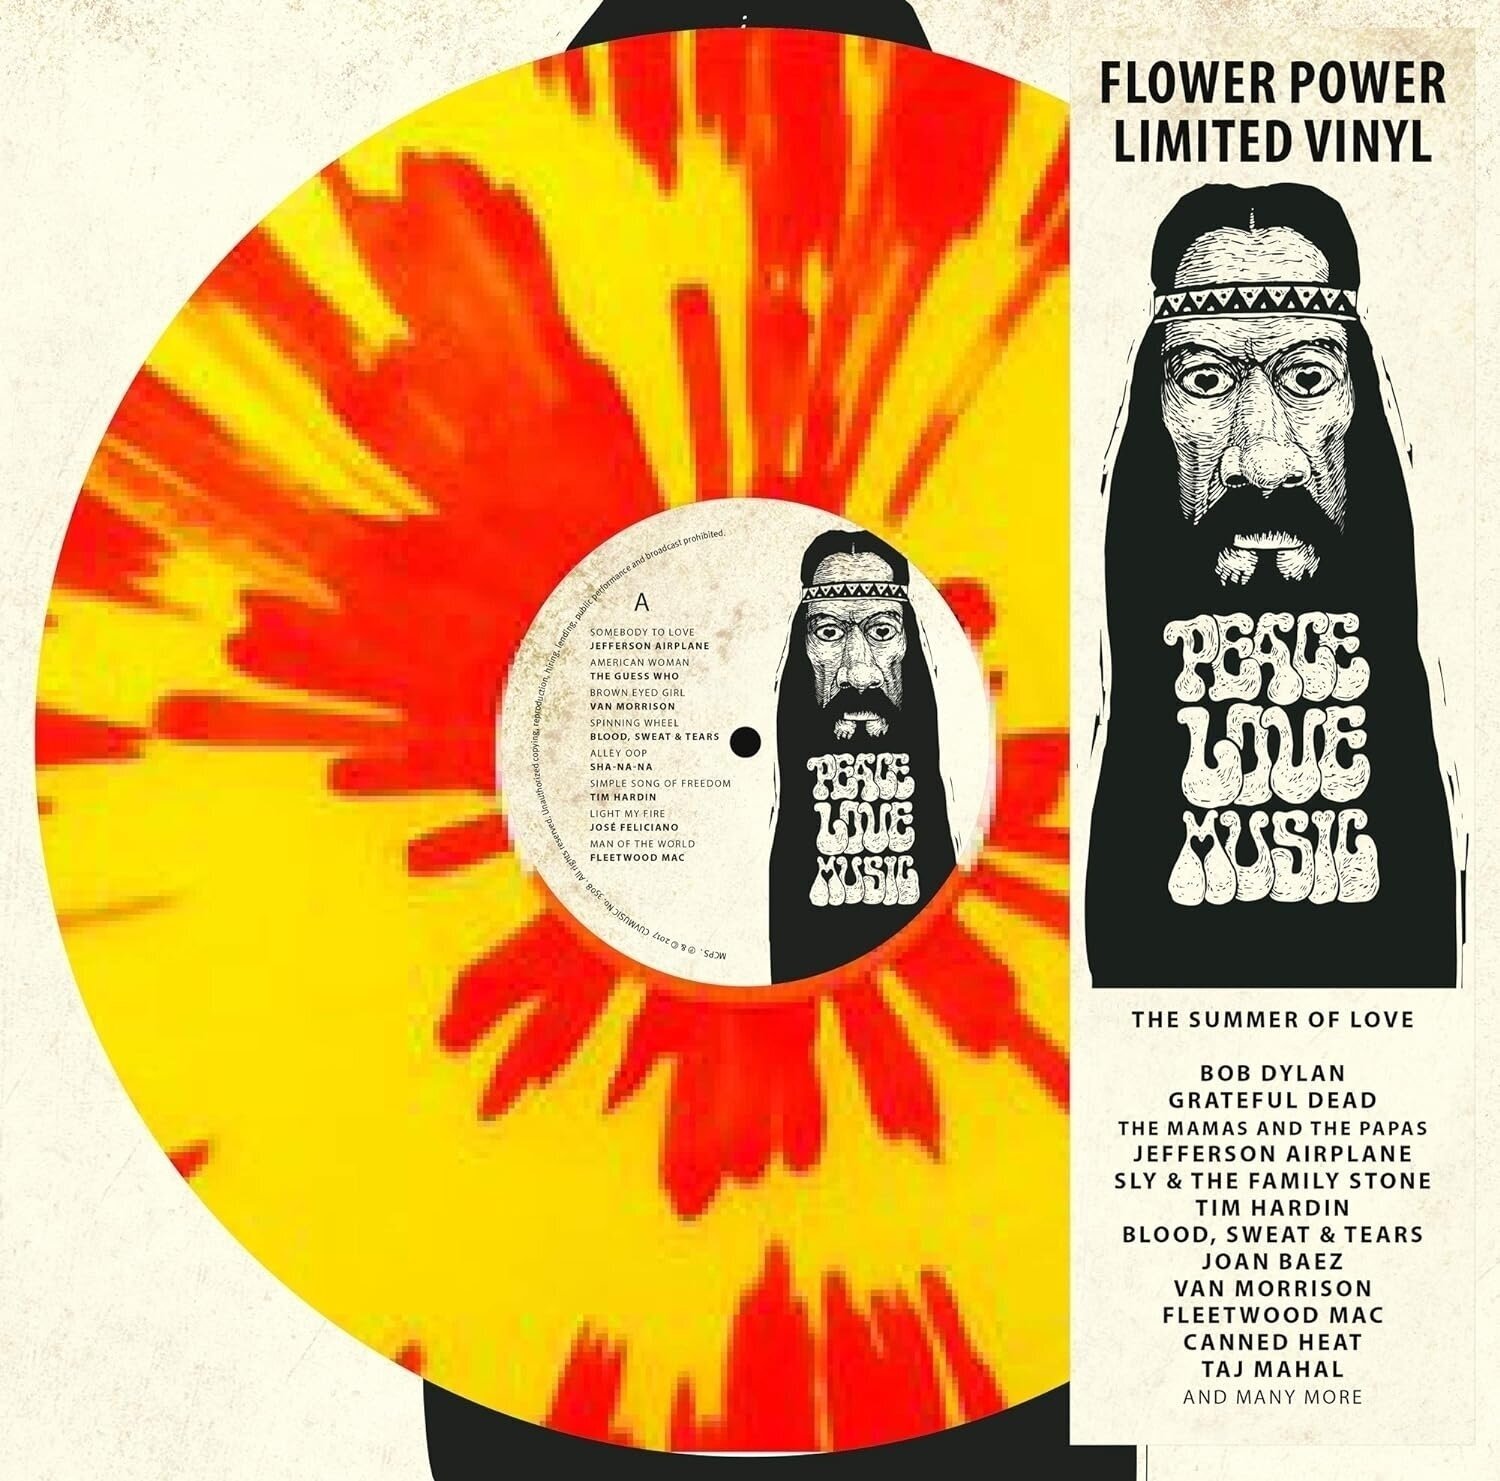 Vinyl Record Various Artists - Peace - Love - Music (Limited Edition) (Yellow/Red Marbled Coloured) (LP)